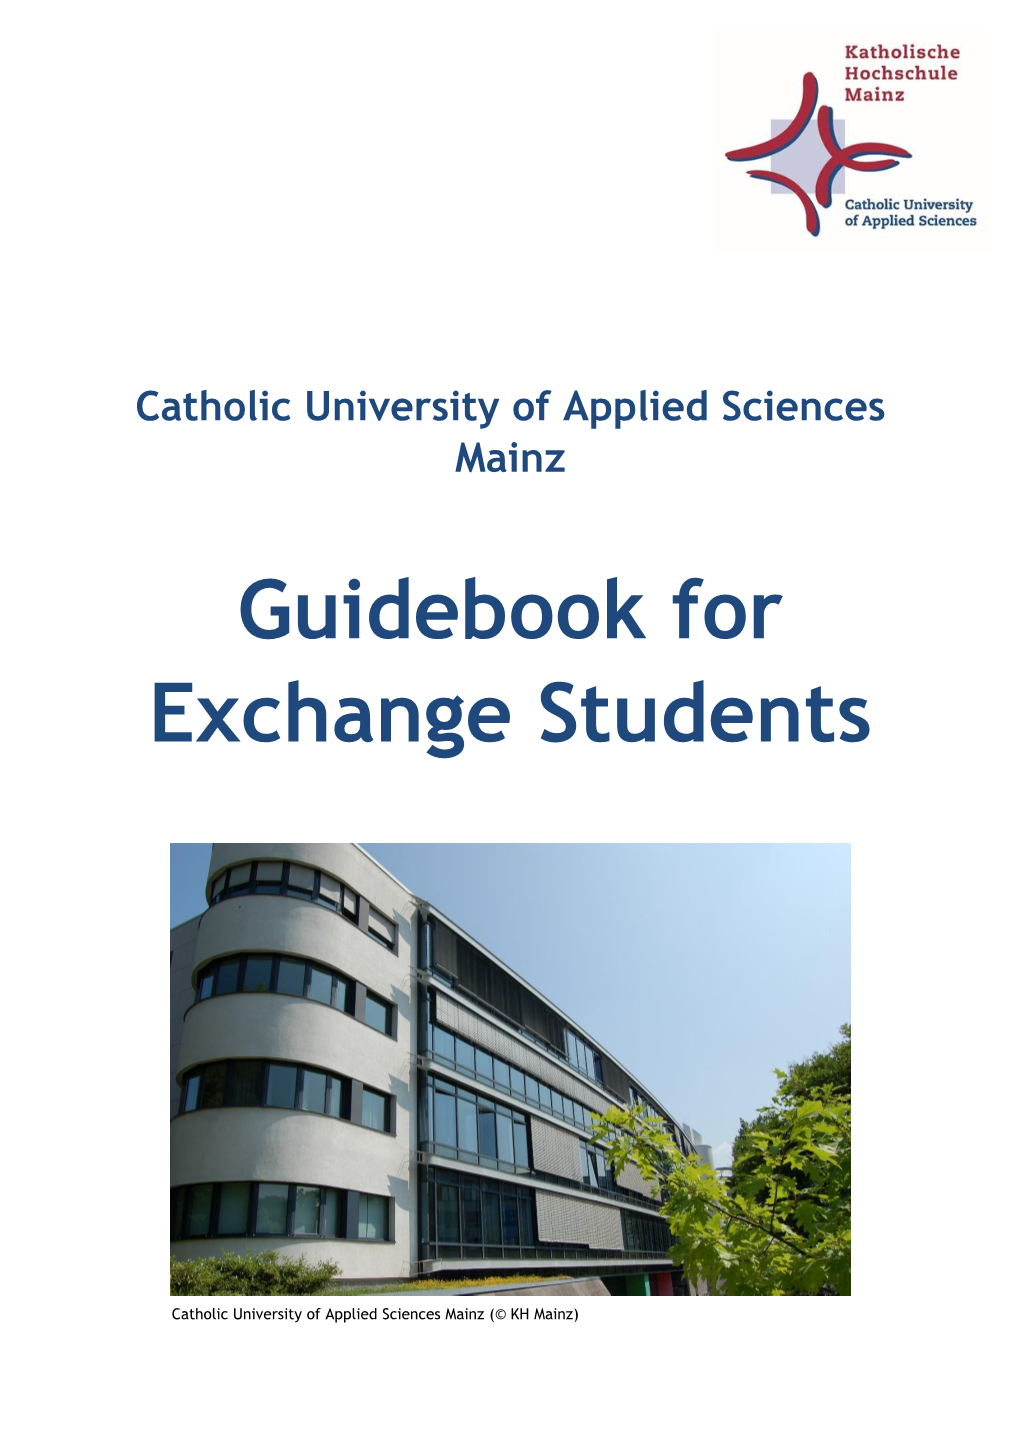 Guidebook for Exchange Students